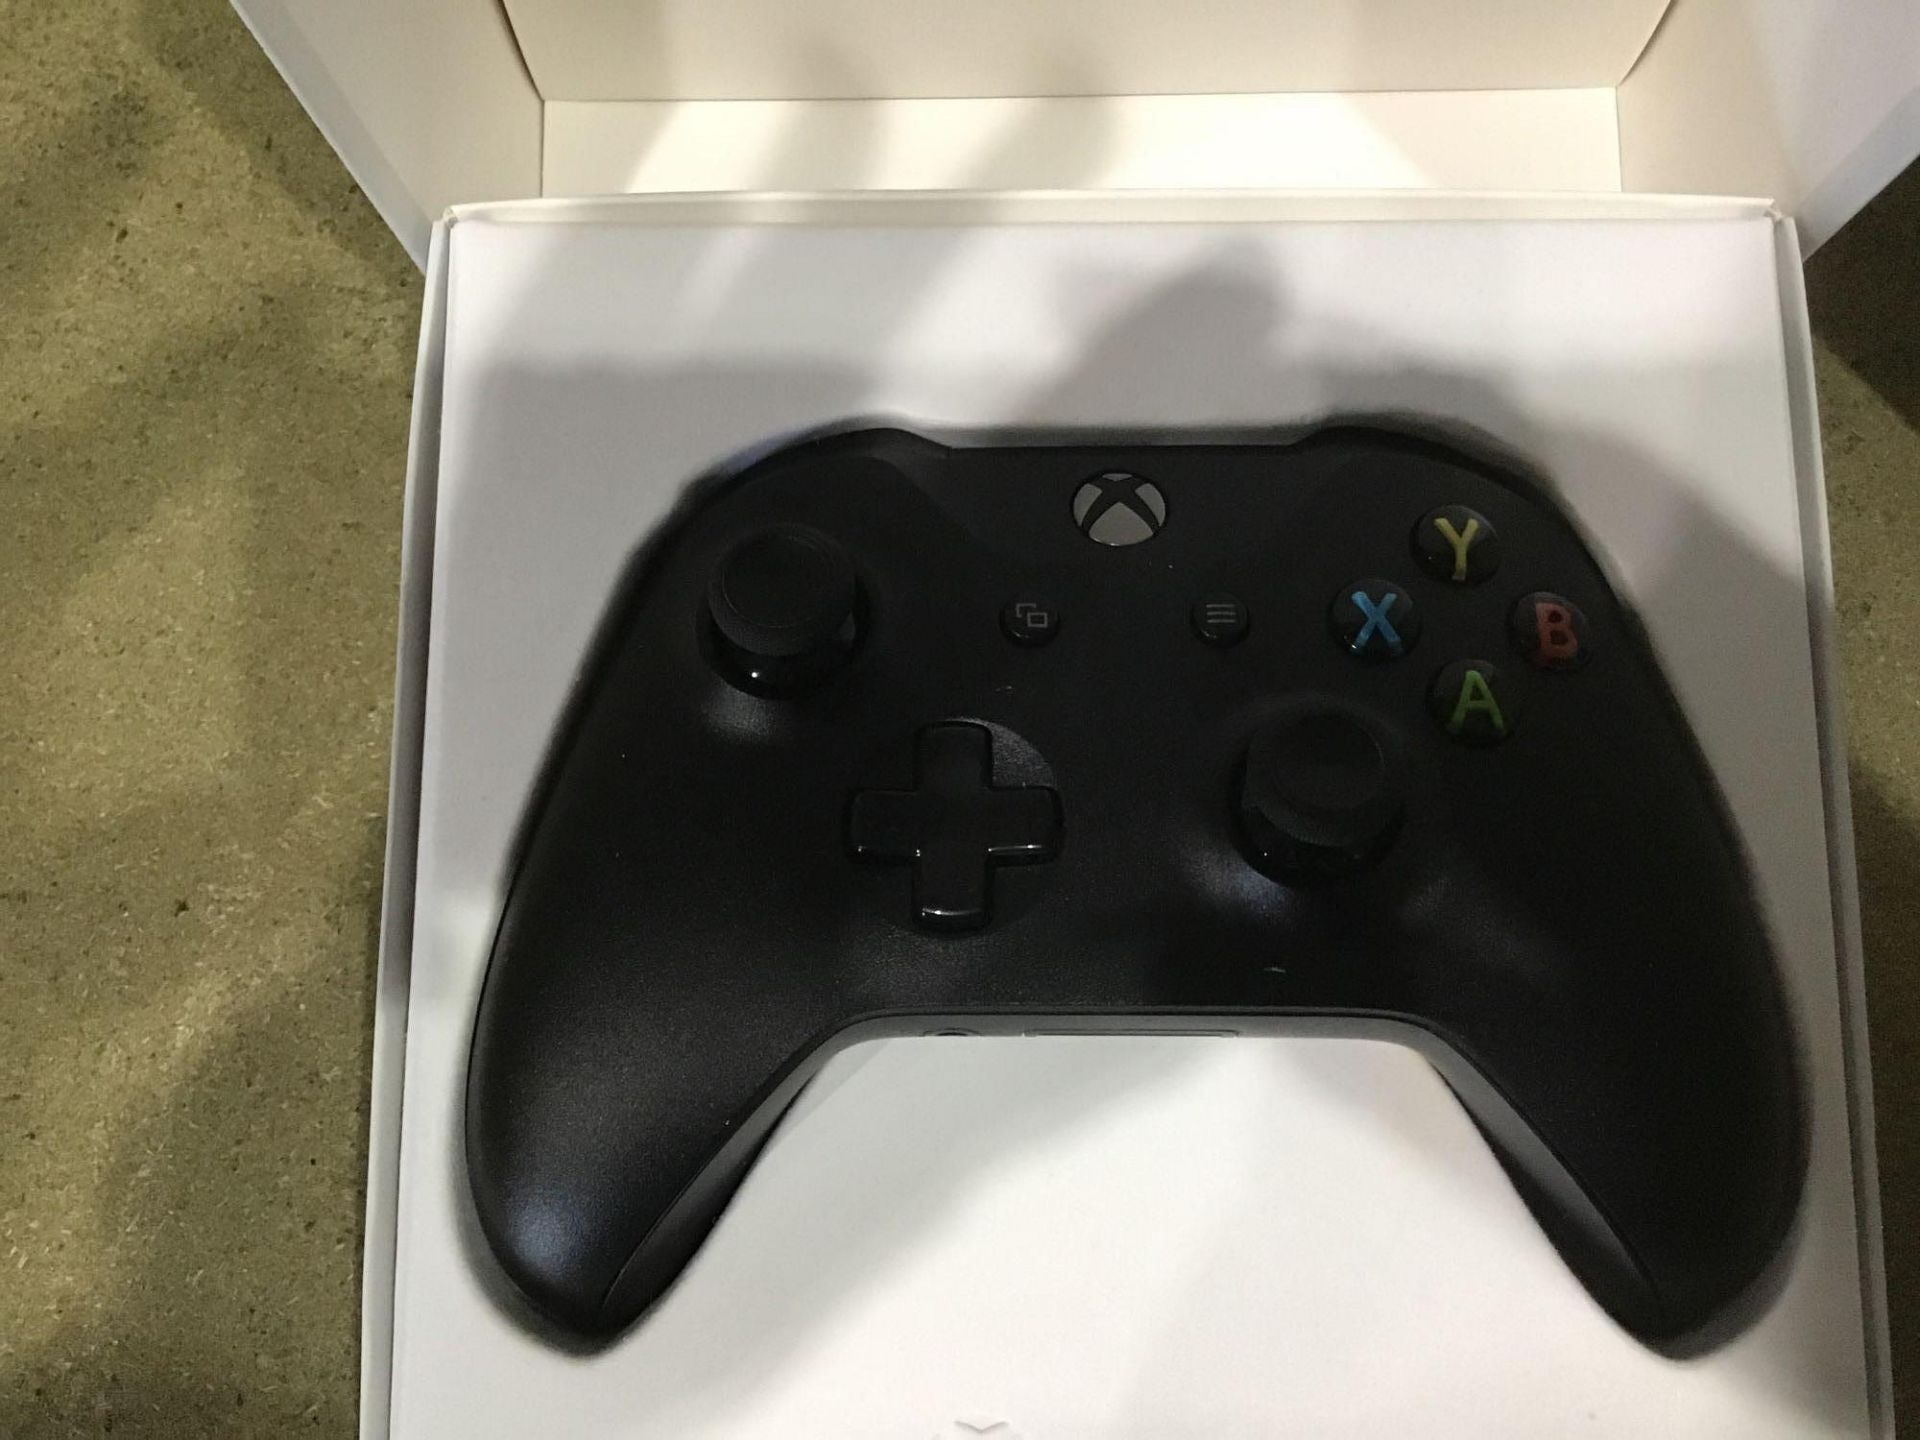 Official Xbox One Wireless Controller - Black 619/9582 £49.99 RRP - Image 2 of 4